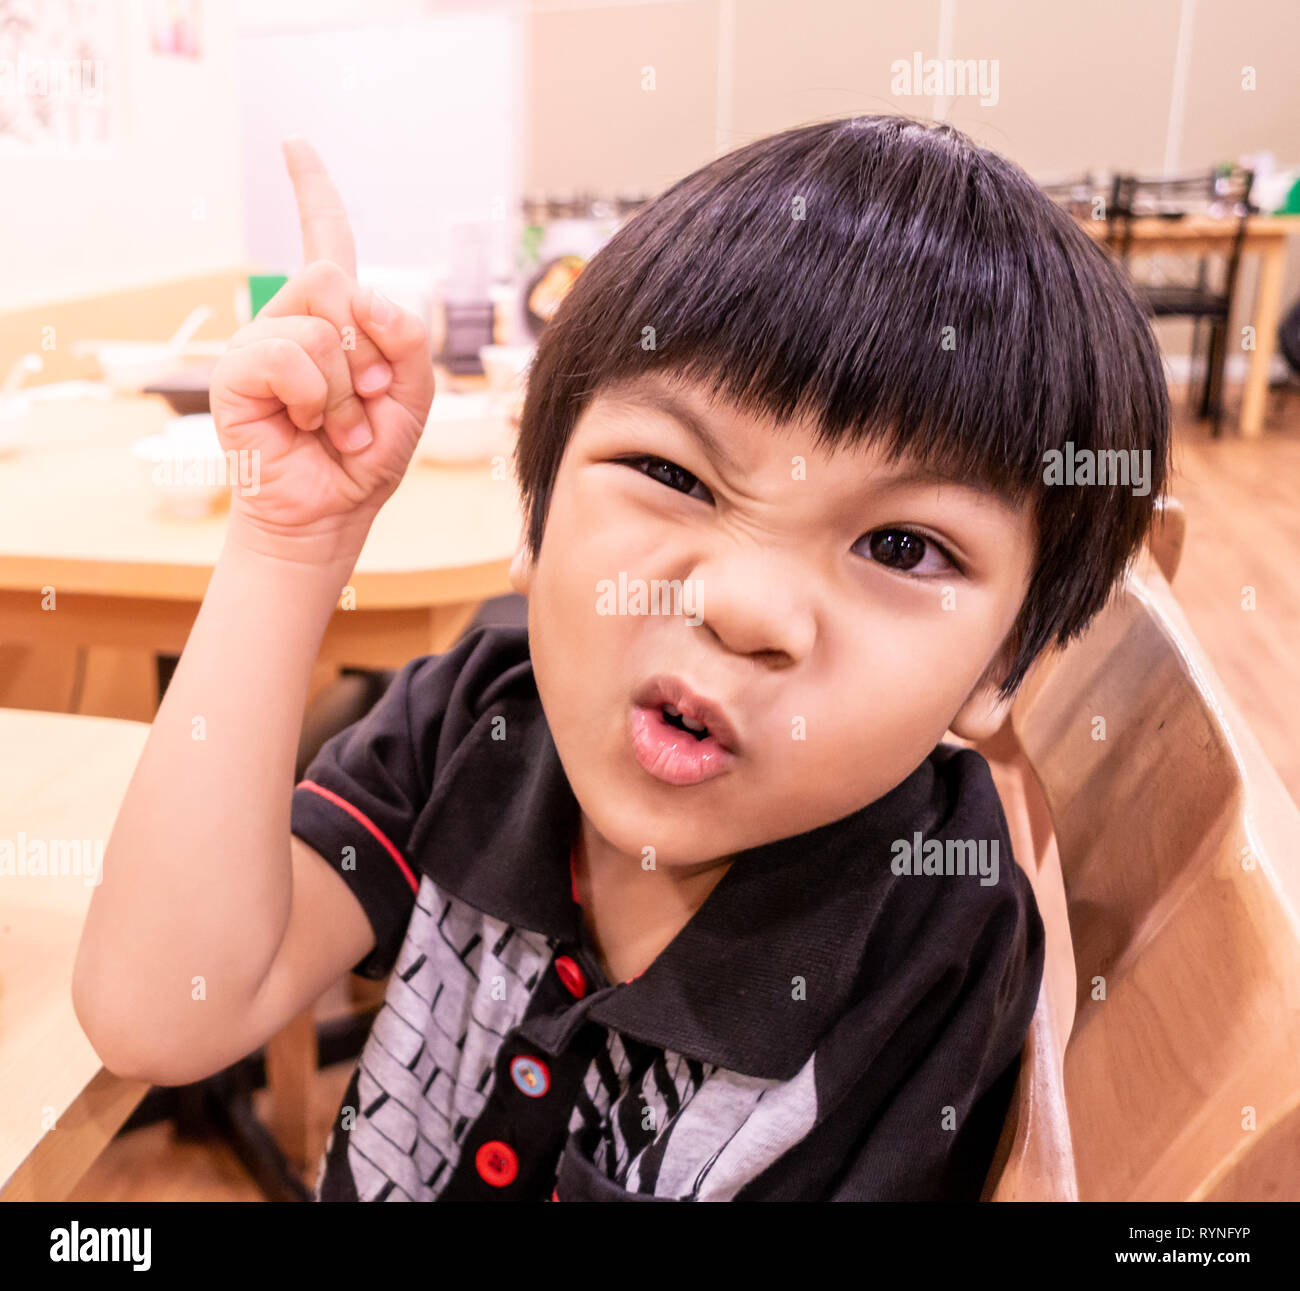 Hungry Funny child posing angry waiting for food in restaurant. Stock Photo